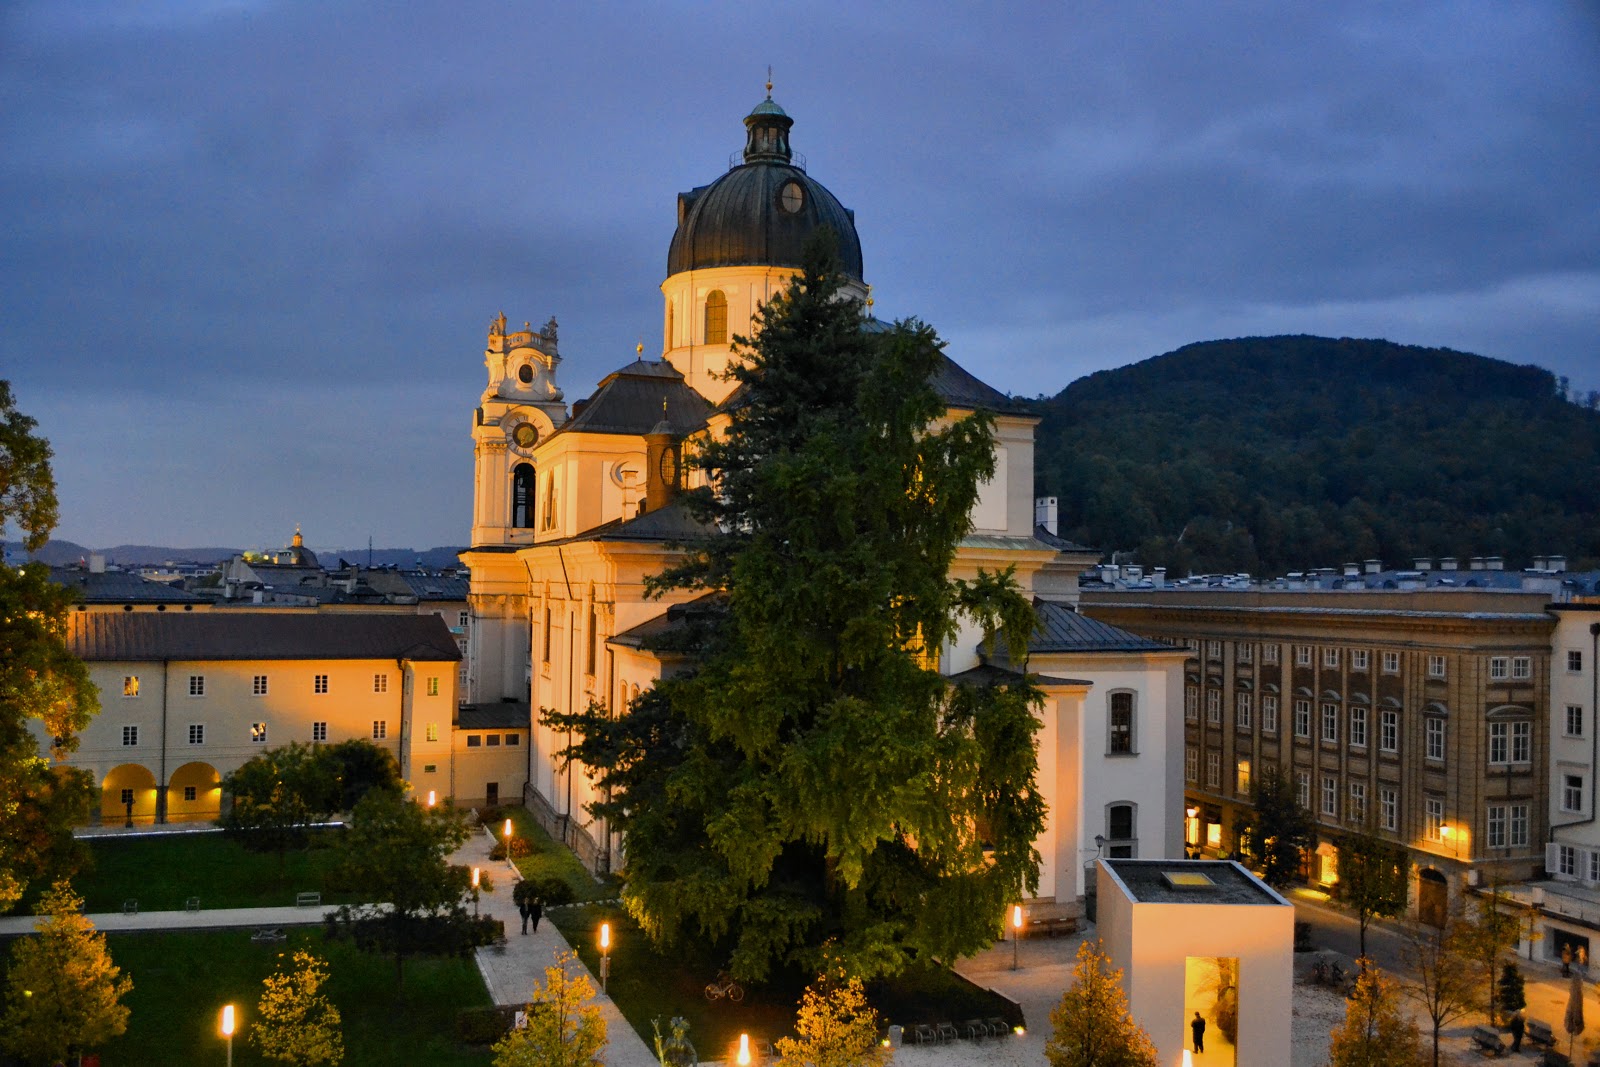 Dusk descends upon Salzburg, Austria, just before the 'The Sound of Music' Gala!